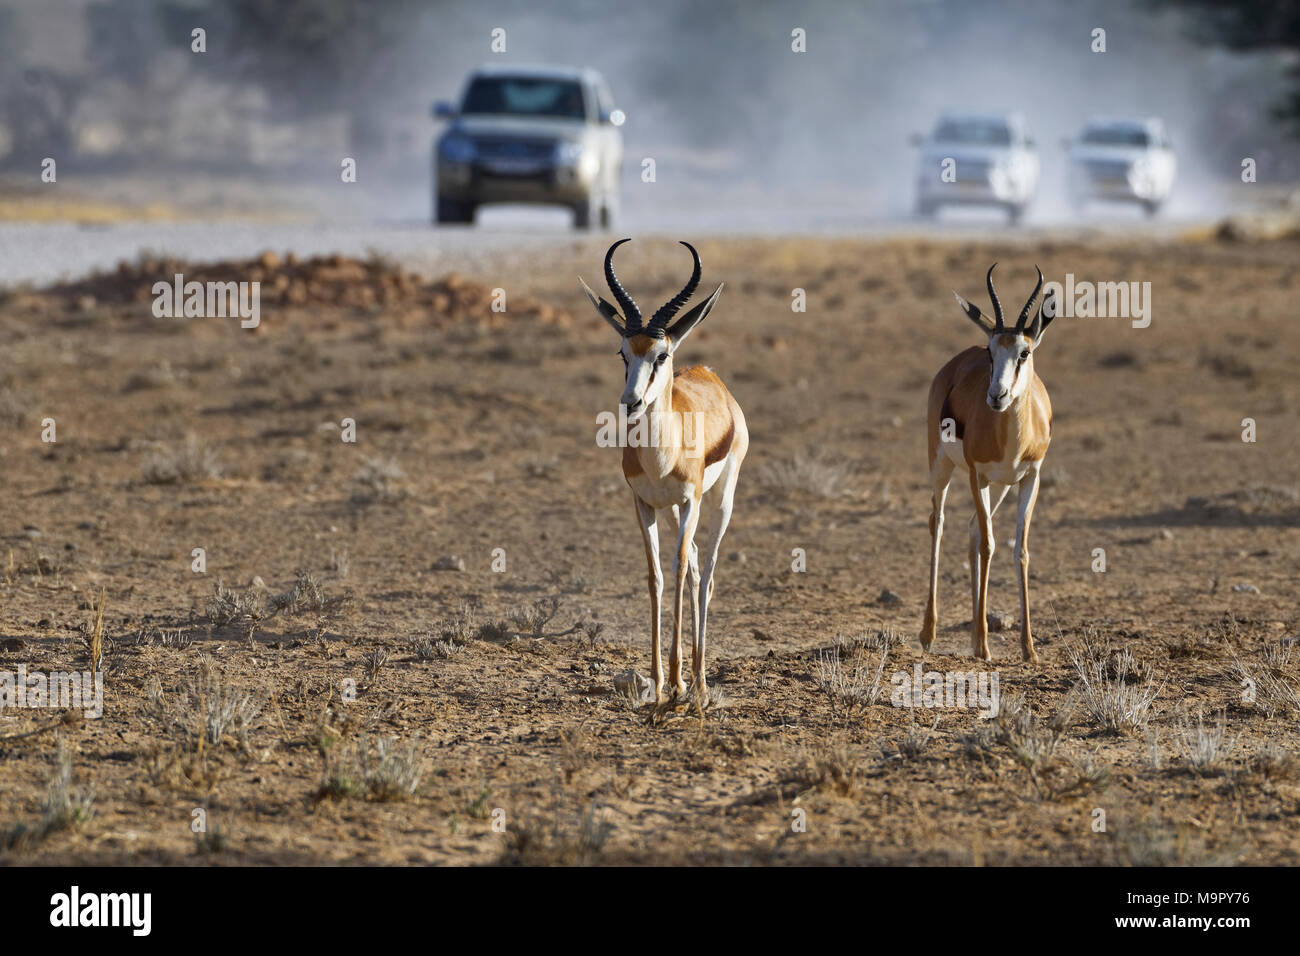 Springboks (Antidorcas marsupialis), male and female, moving on arid ground, vehicles on a dirt road at back Stock Photo